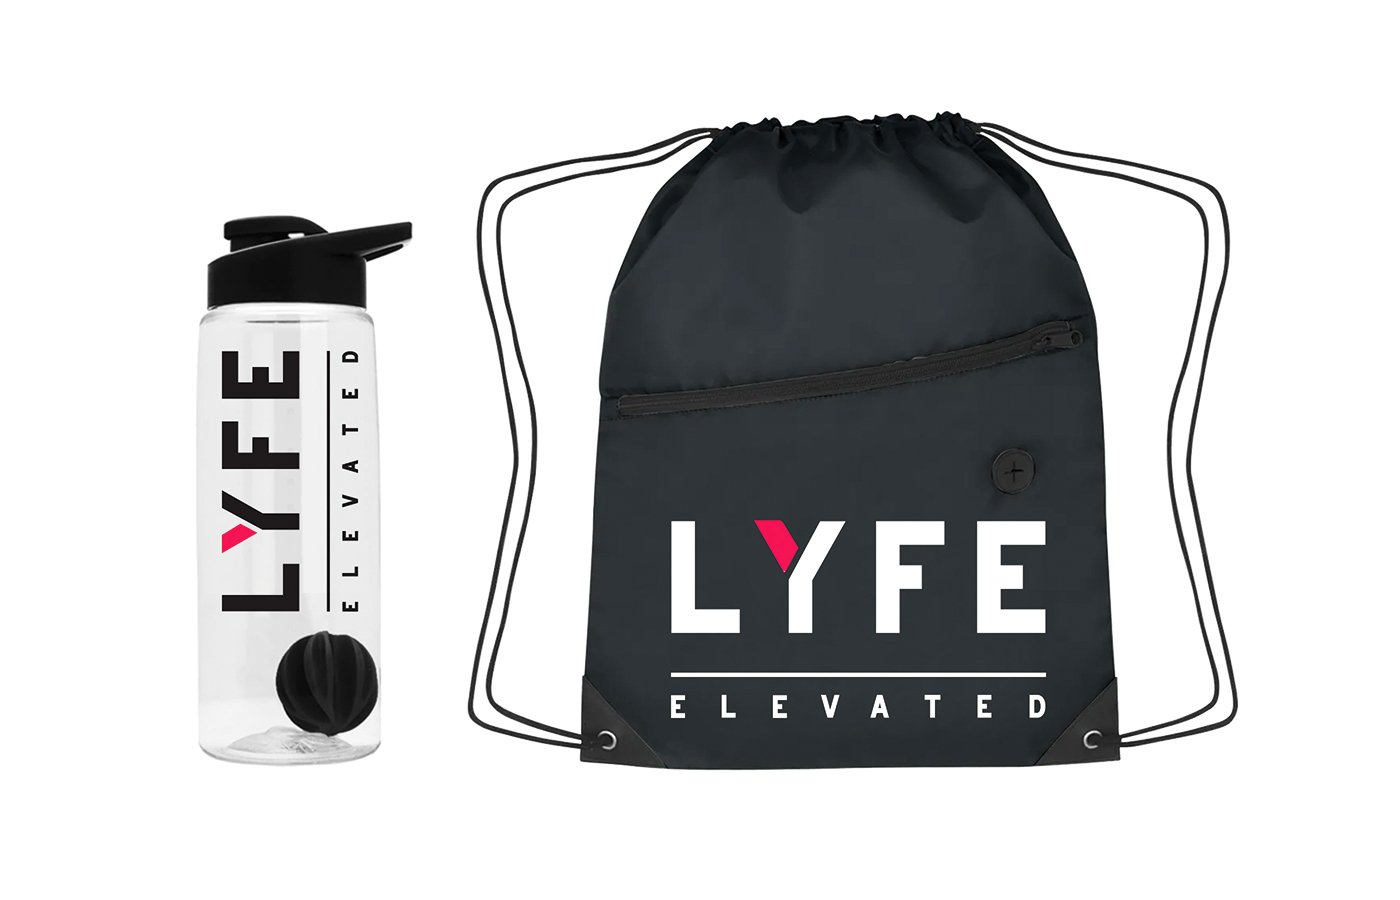 Dalya Kandil designed logos and product packaging for Lyfe Elevated, Micheal Ulisse contributed to marketing and formulations